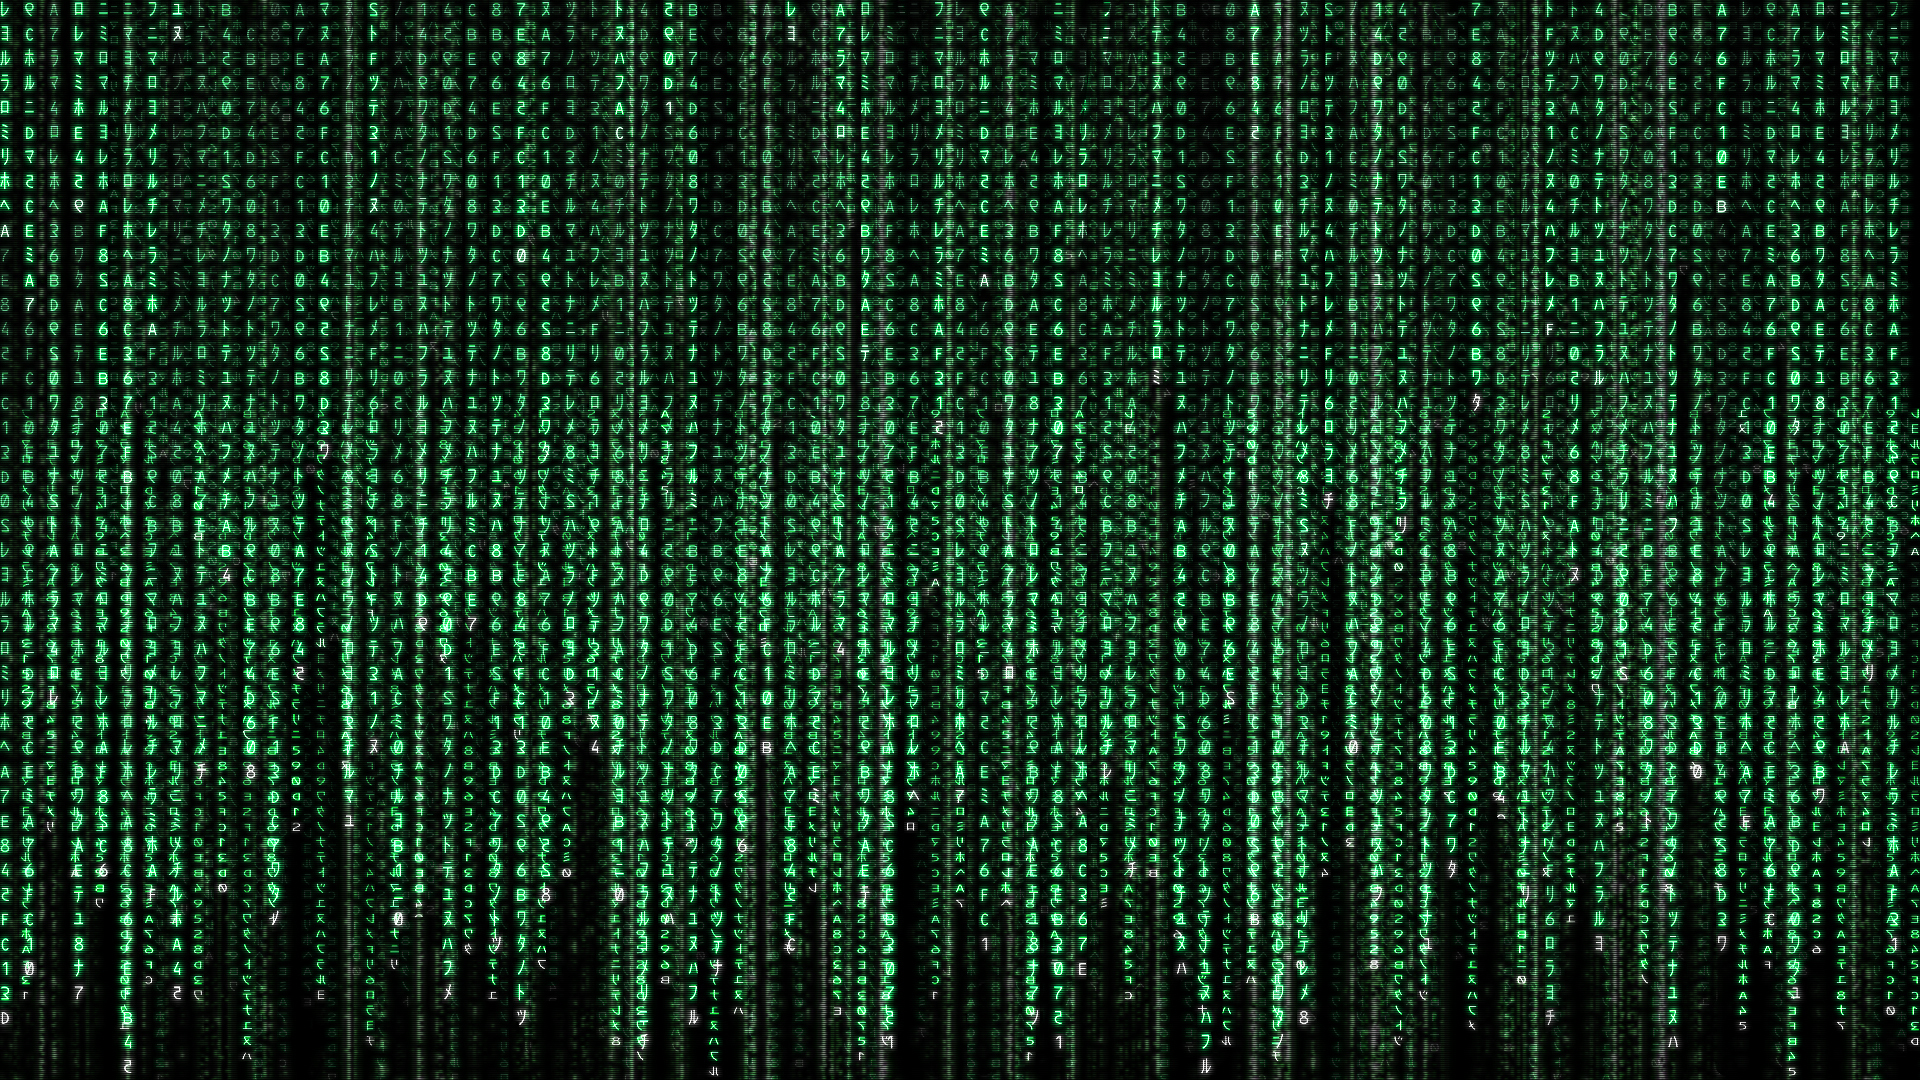 Matrix, texture, titles and letters, background, download photo, words texture